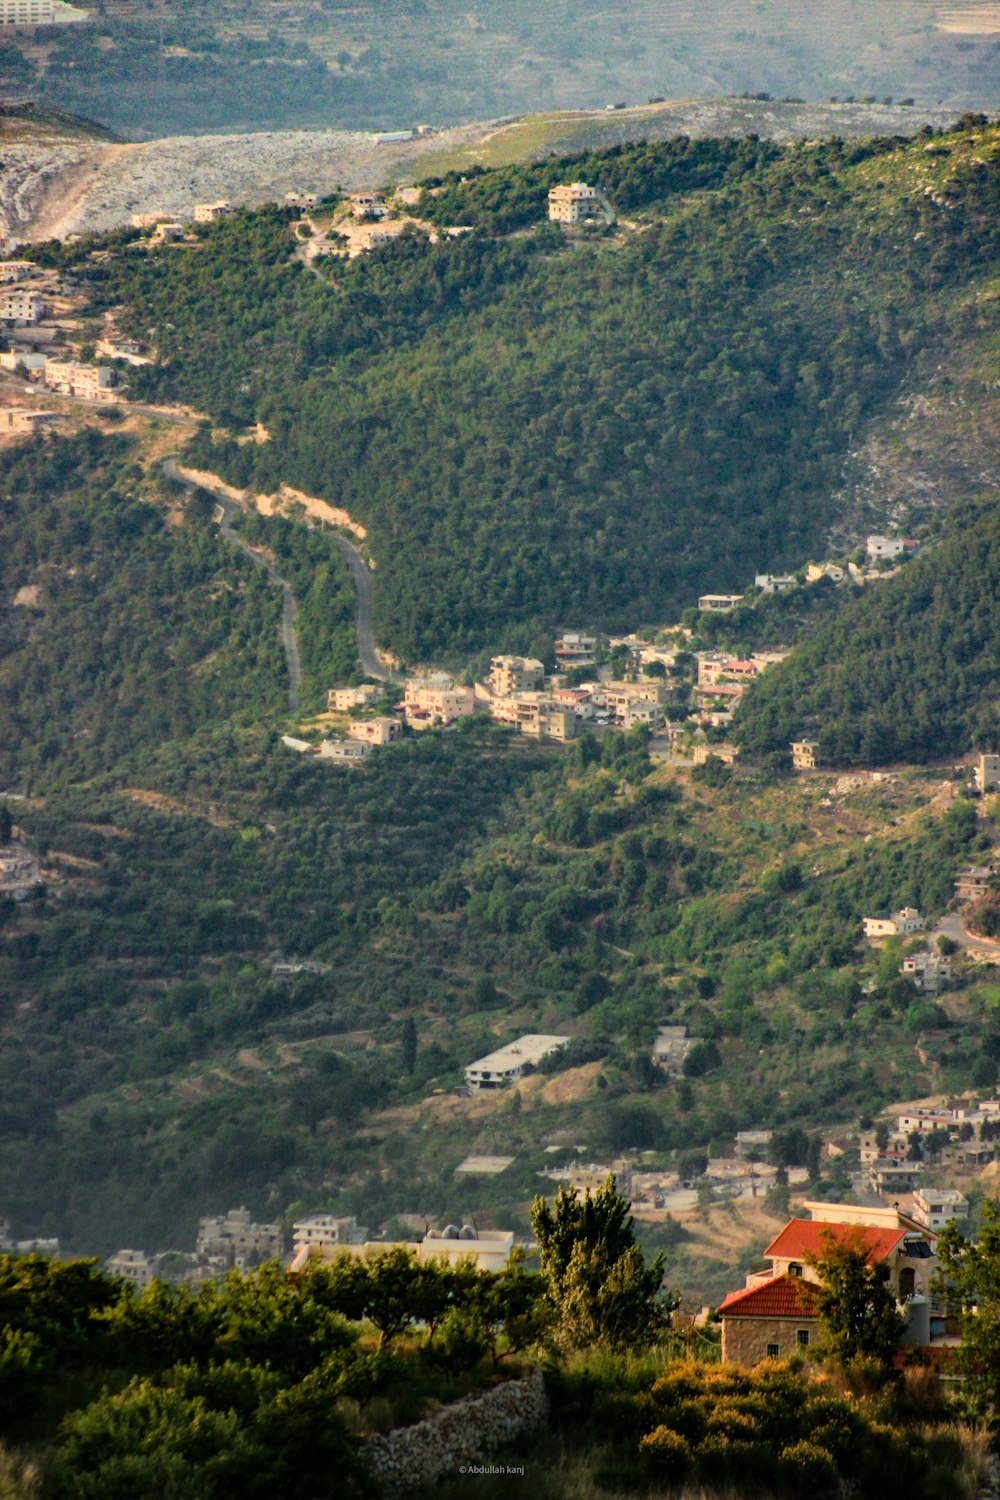 a view of a town nestled on a mountain